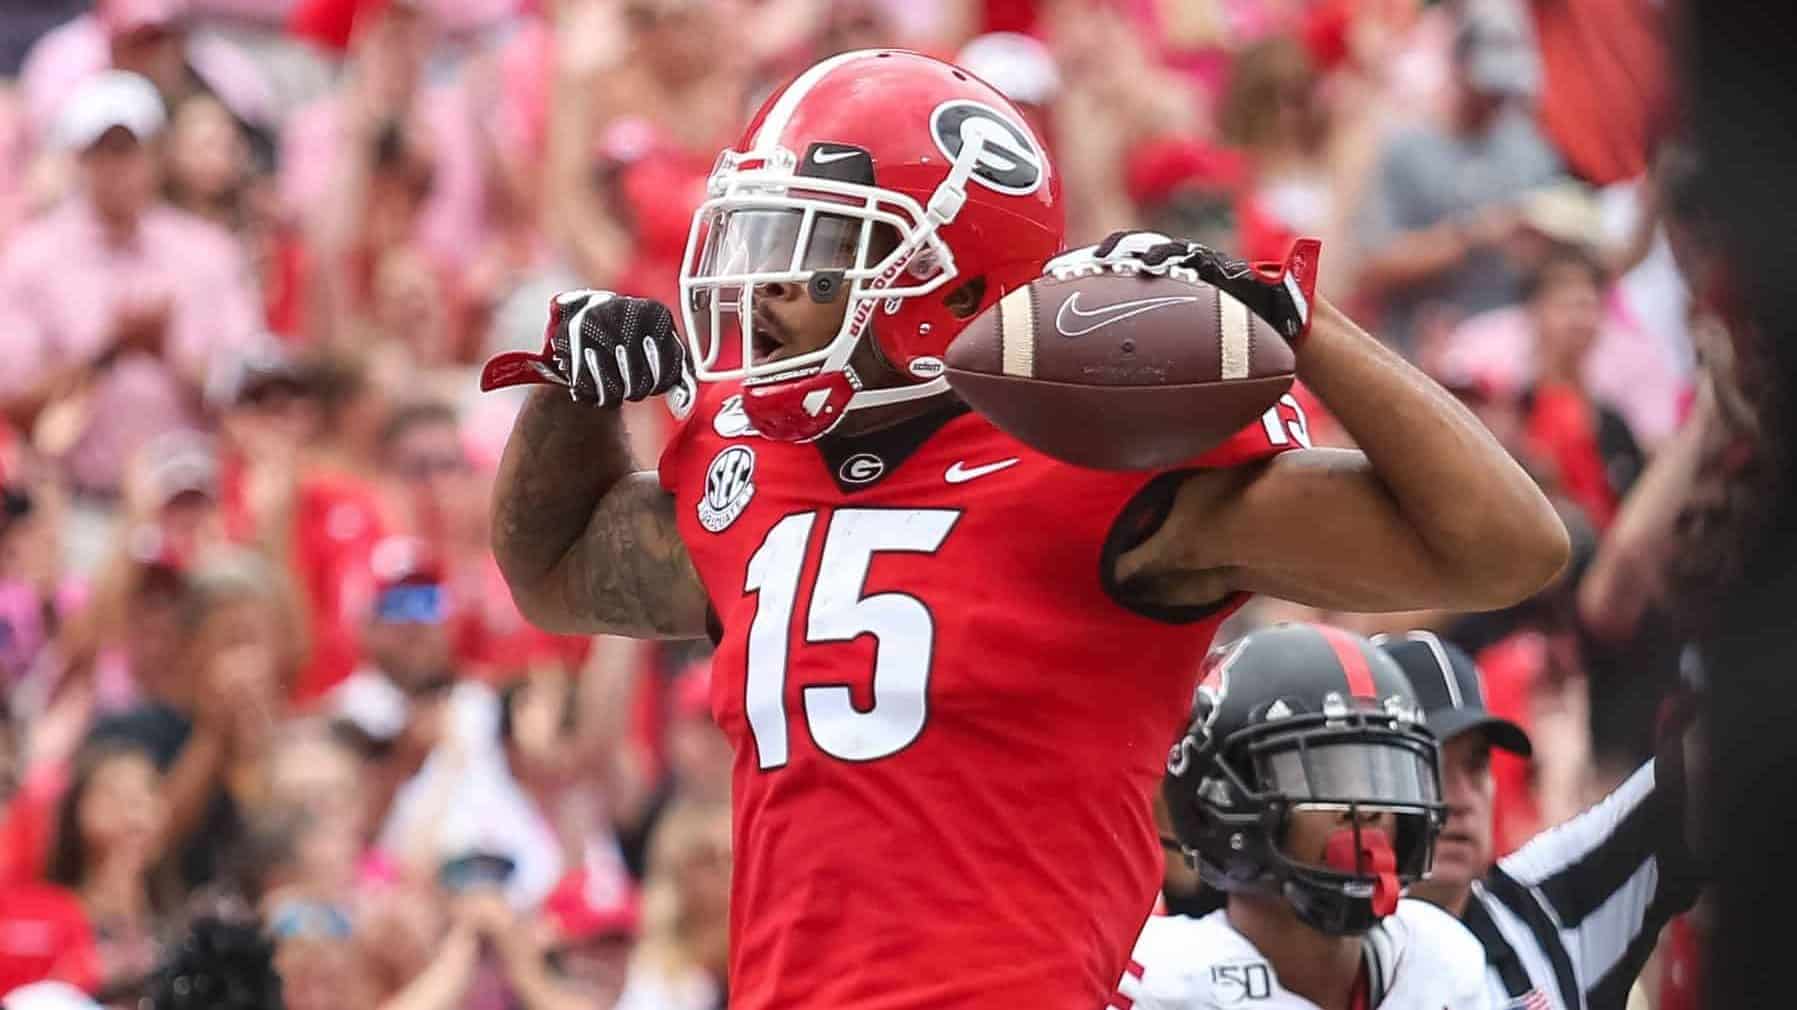 ATHENS, GA - SEPTEMBER 14: Lawrence Cager #15 of the Georgia Bulldogs celebrates a pass reception for a touchdown during the first half of a game against the Arkansas State Red Wolves at Sanford Stadium on September 14, 2019 in Athens, Georgia. New York Jets